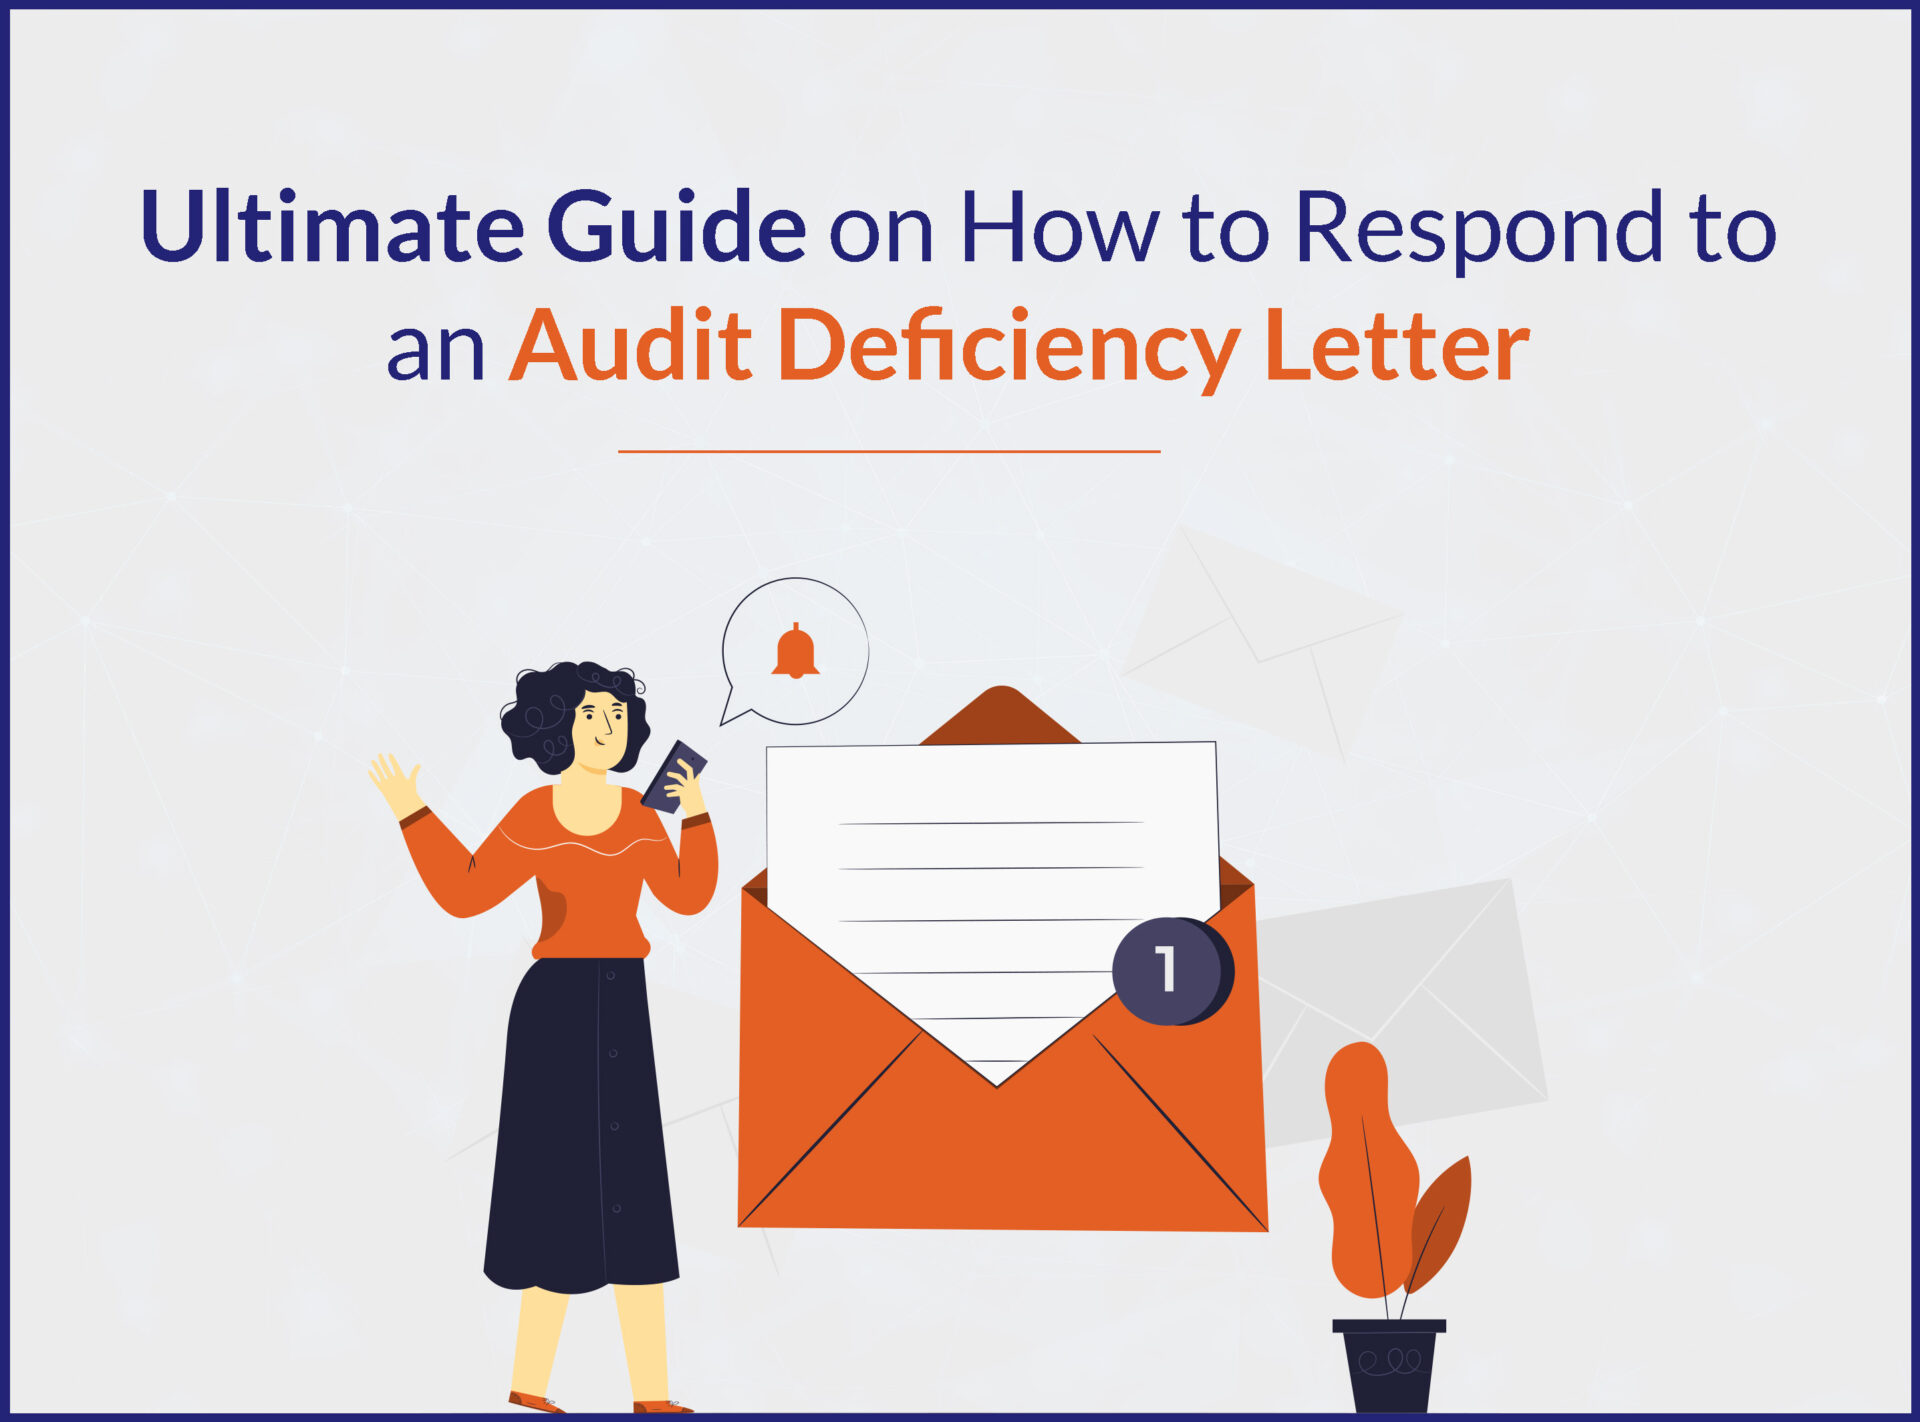 Ultimate Guide on How to Respond to an Audit Deficiency Letter